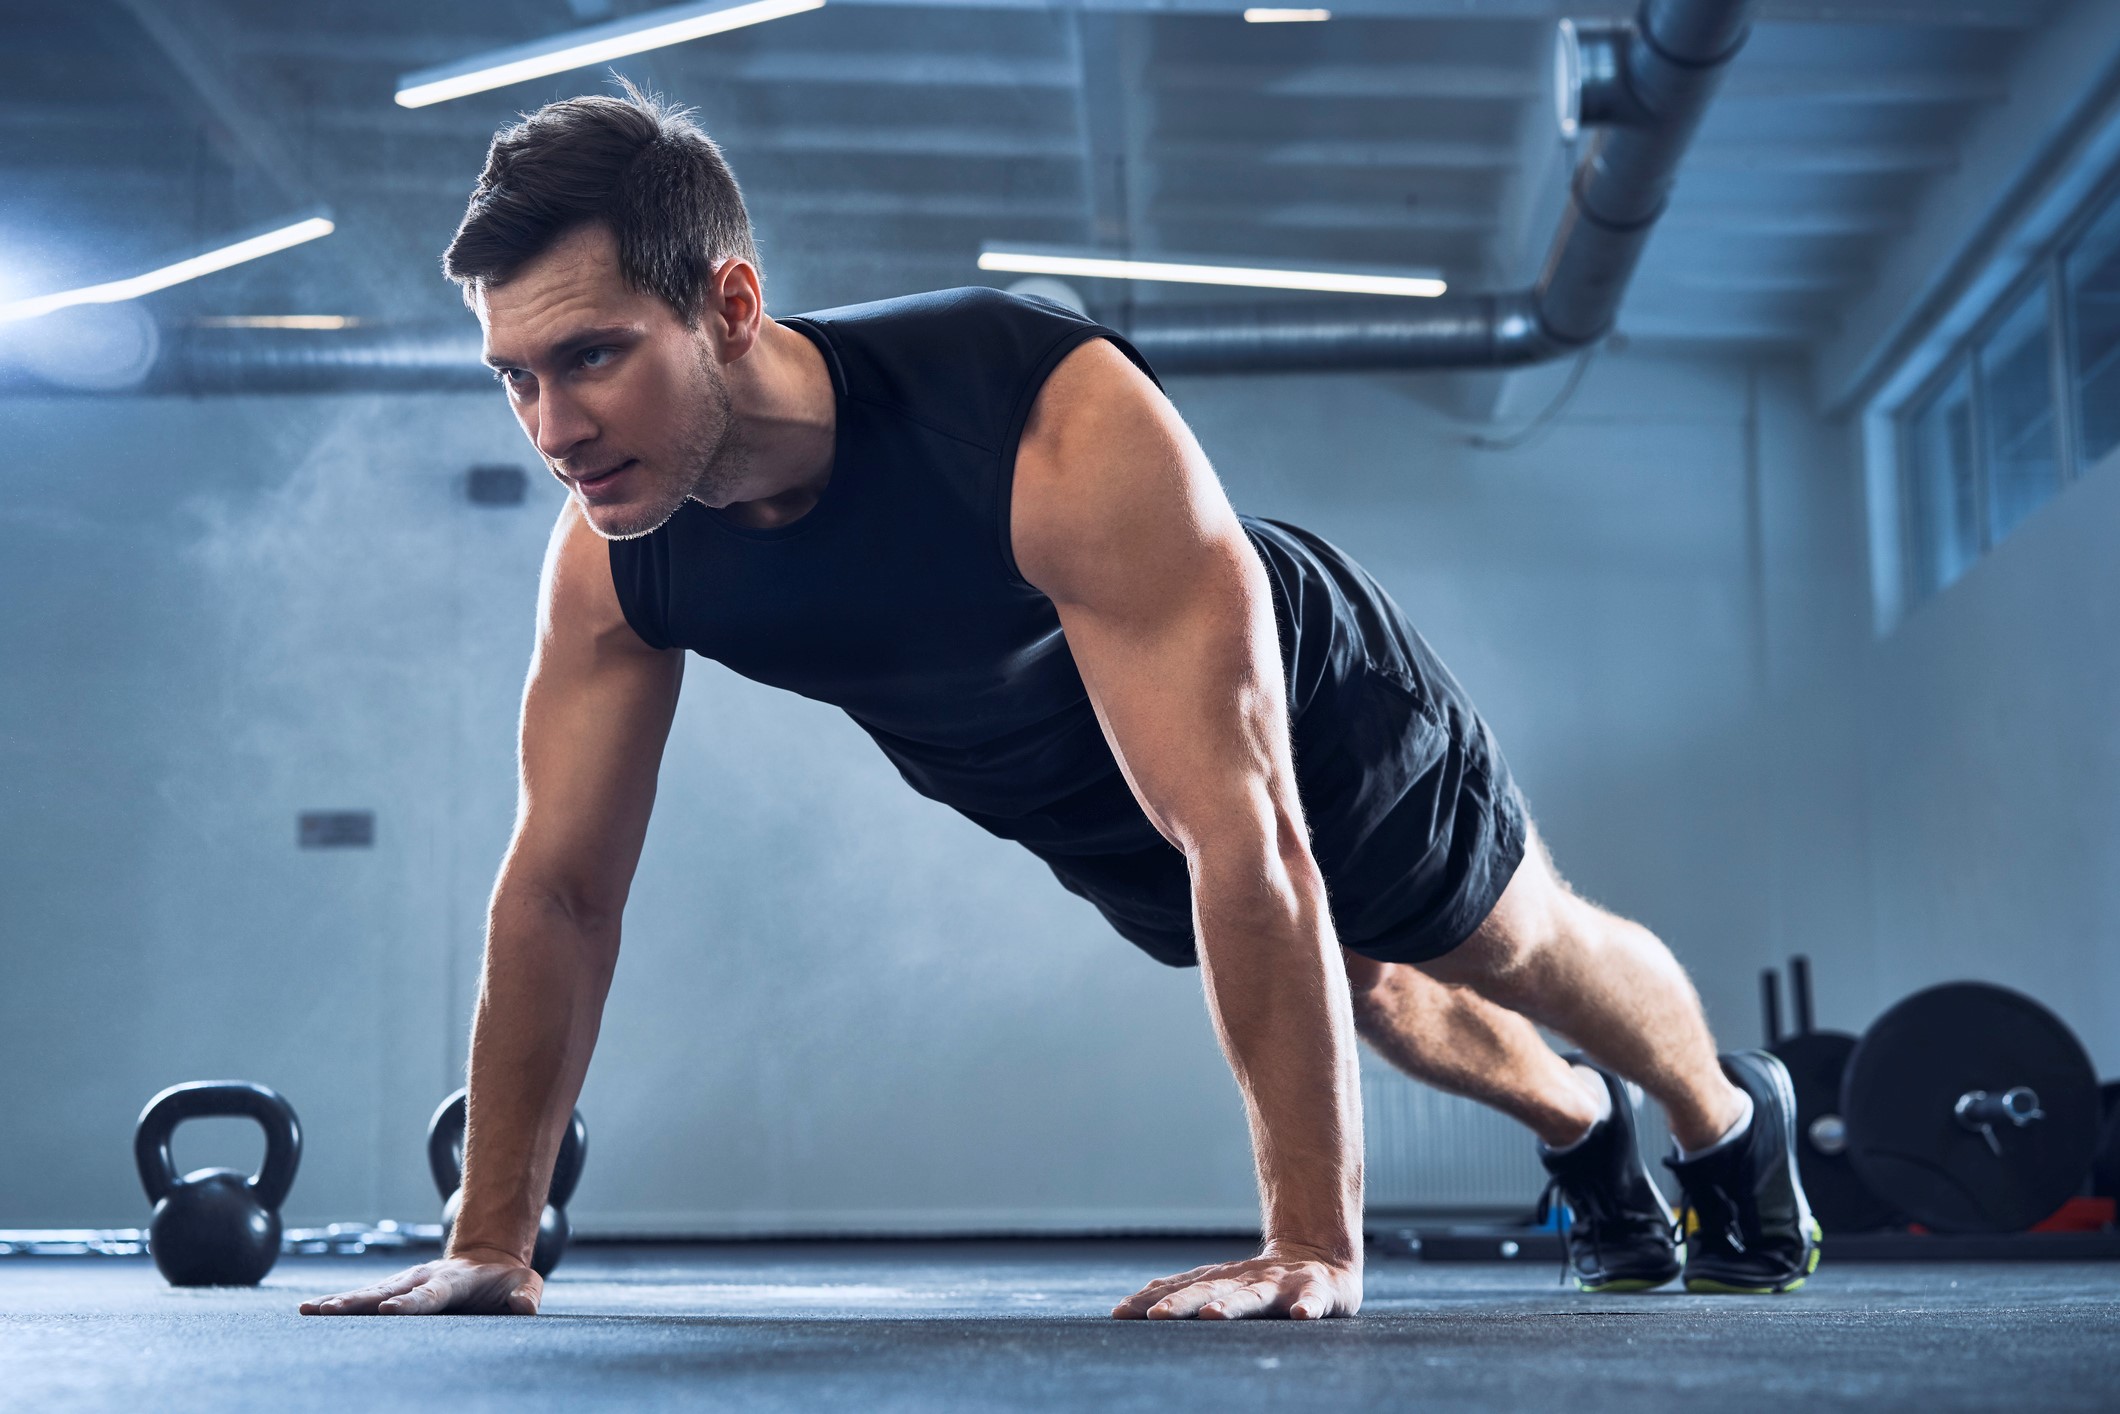 Best Push-Up Workout for People of All Fitness Levels